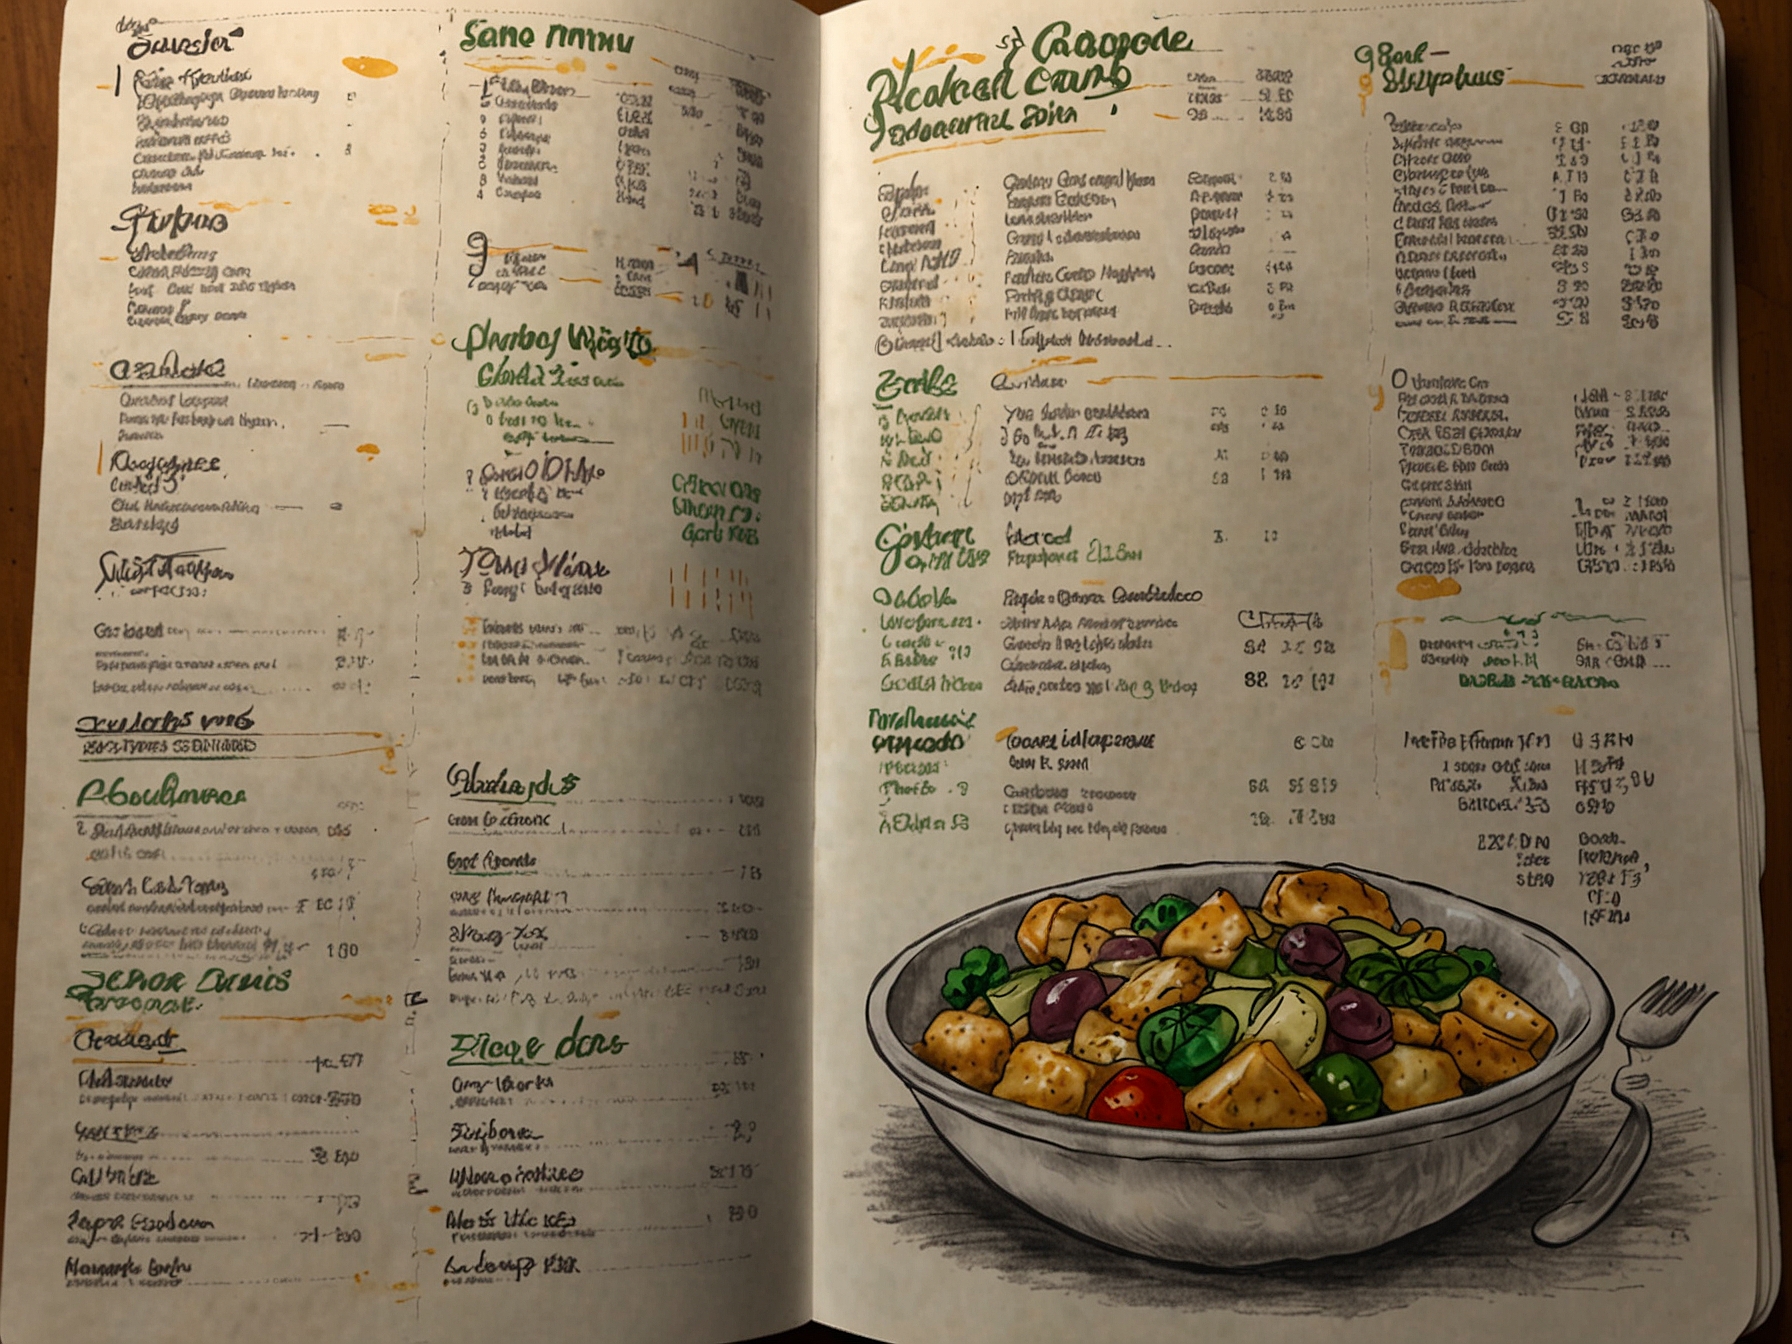 An Olive Garden menu showing updated prices alongside high-quality dishes. The focus is on the premium offerings and the brand's commitment to quality during challenging economic times.